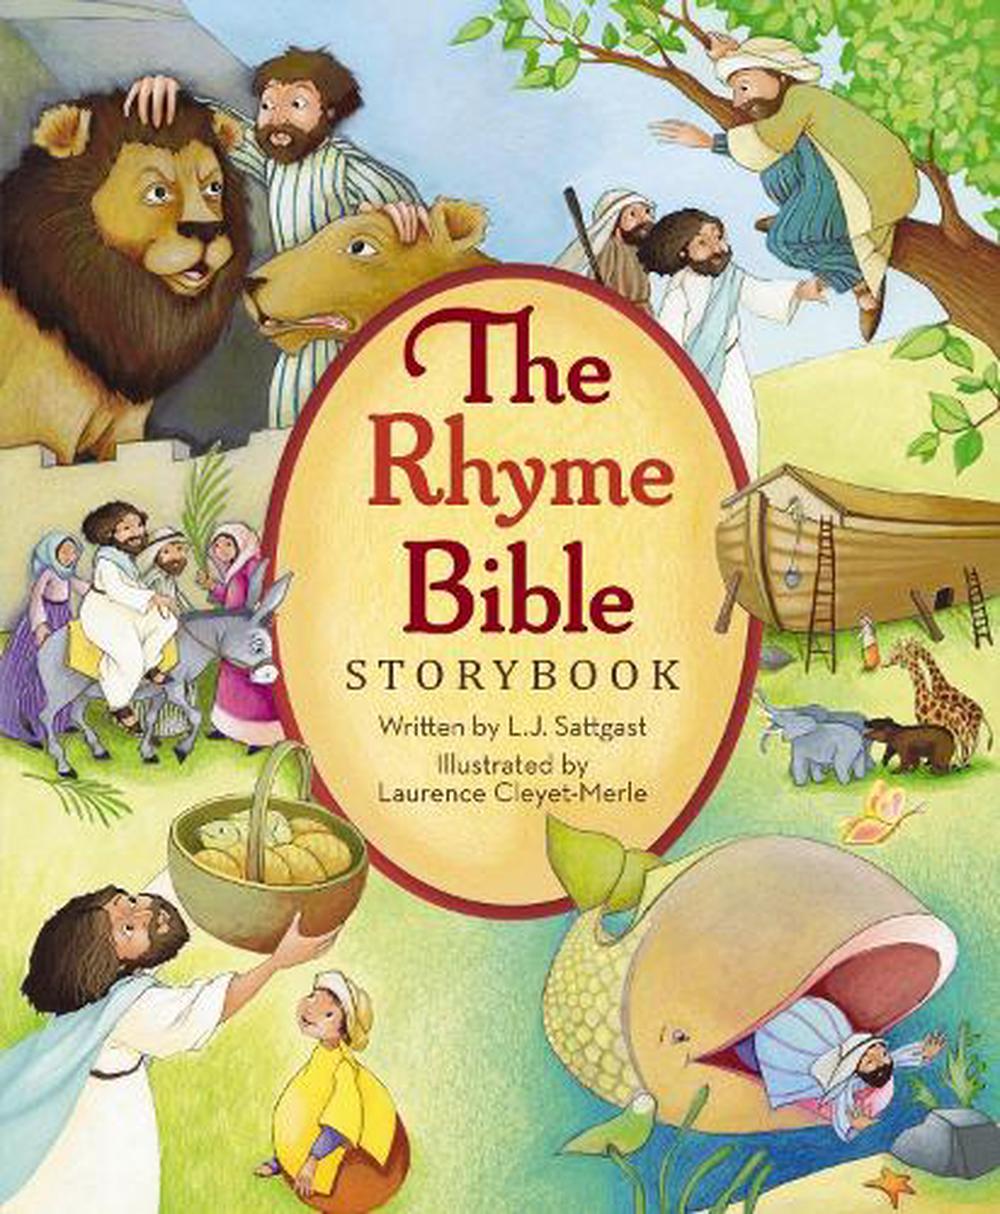 Rhyme　online　9780310726029　Storybook　by　Buy　Bible　Hardcover,　at　The　Nile　Sattgast,　The